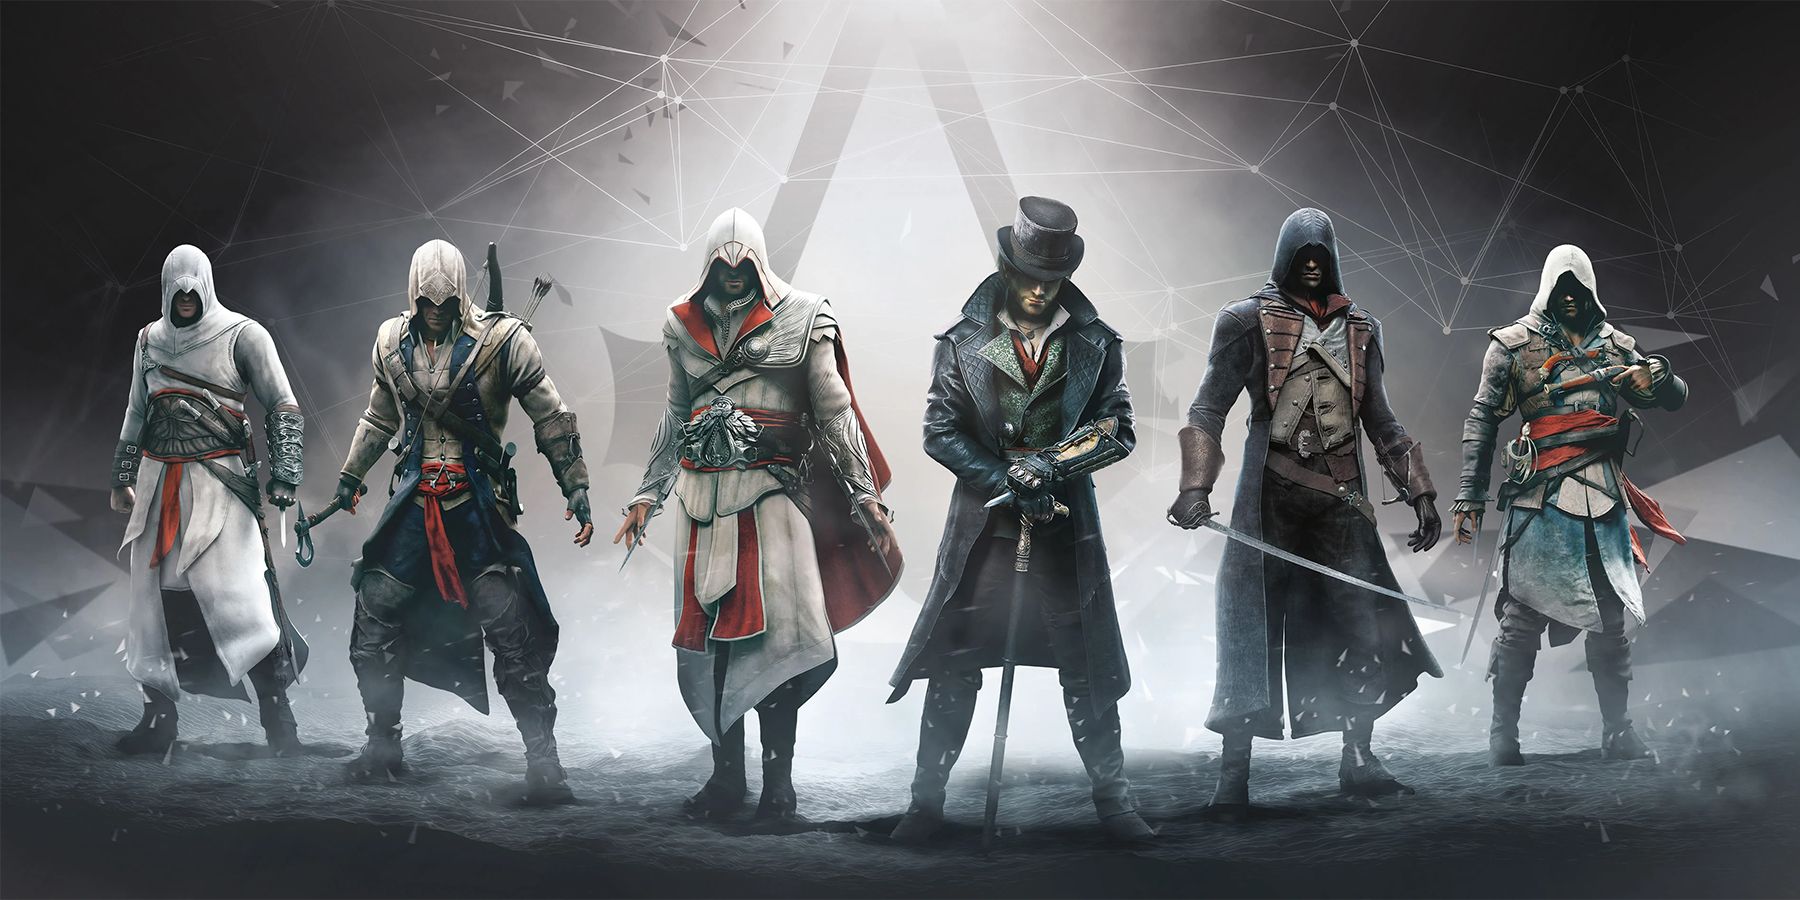 what is the full creed of the assassin brotherhood